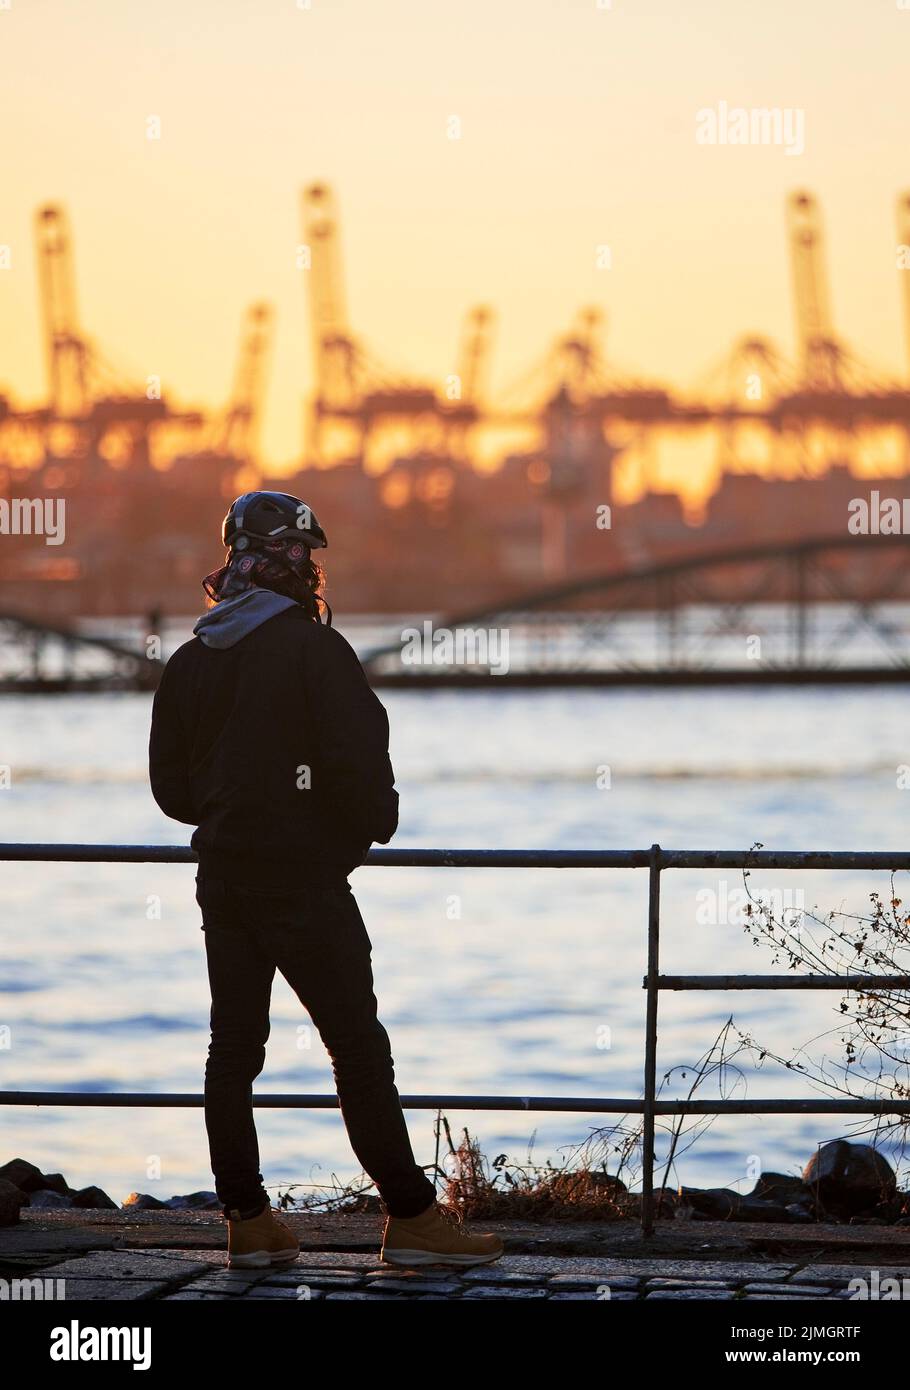 A person in front of loading cranes on the North Elbe in Altona, Port of Hamburg, Germany, Europe Stock Photo